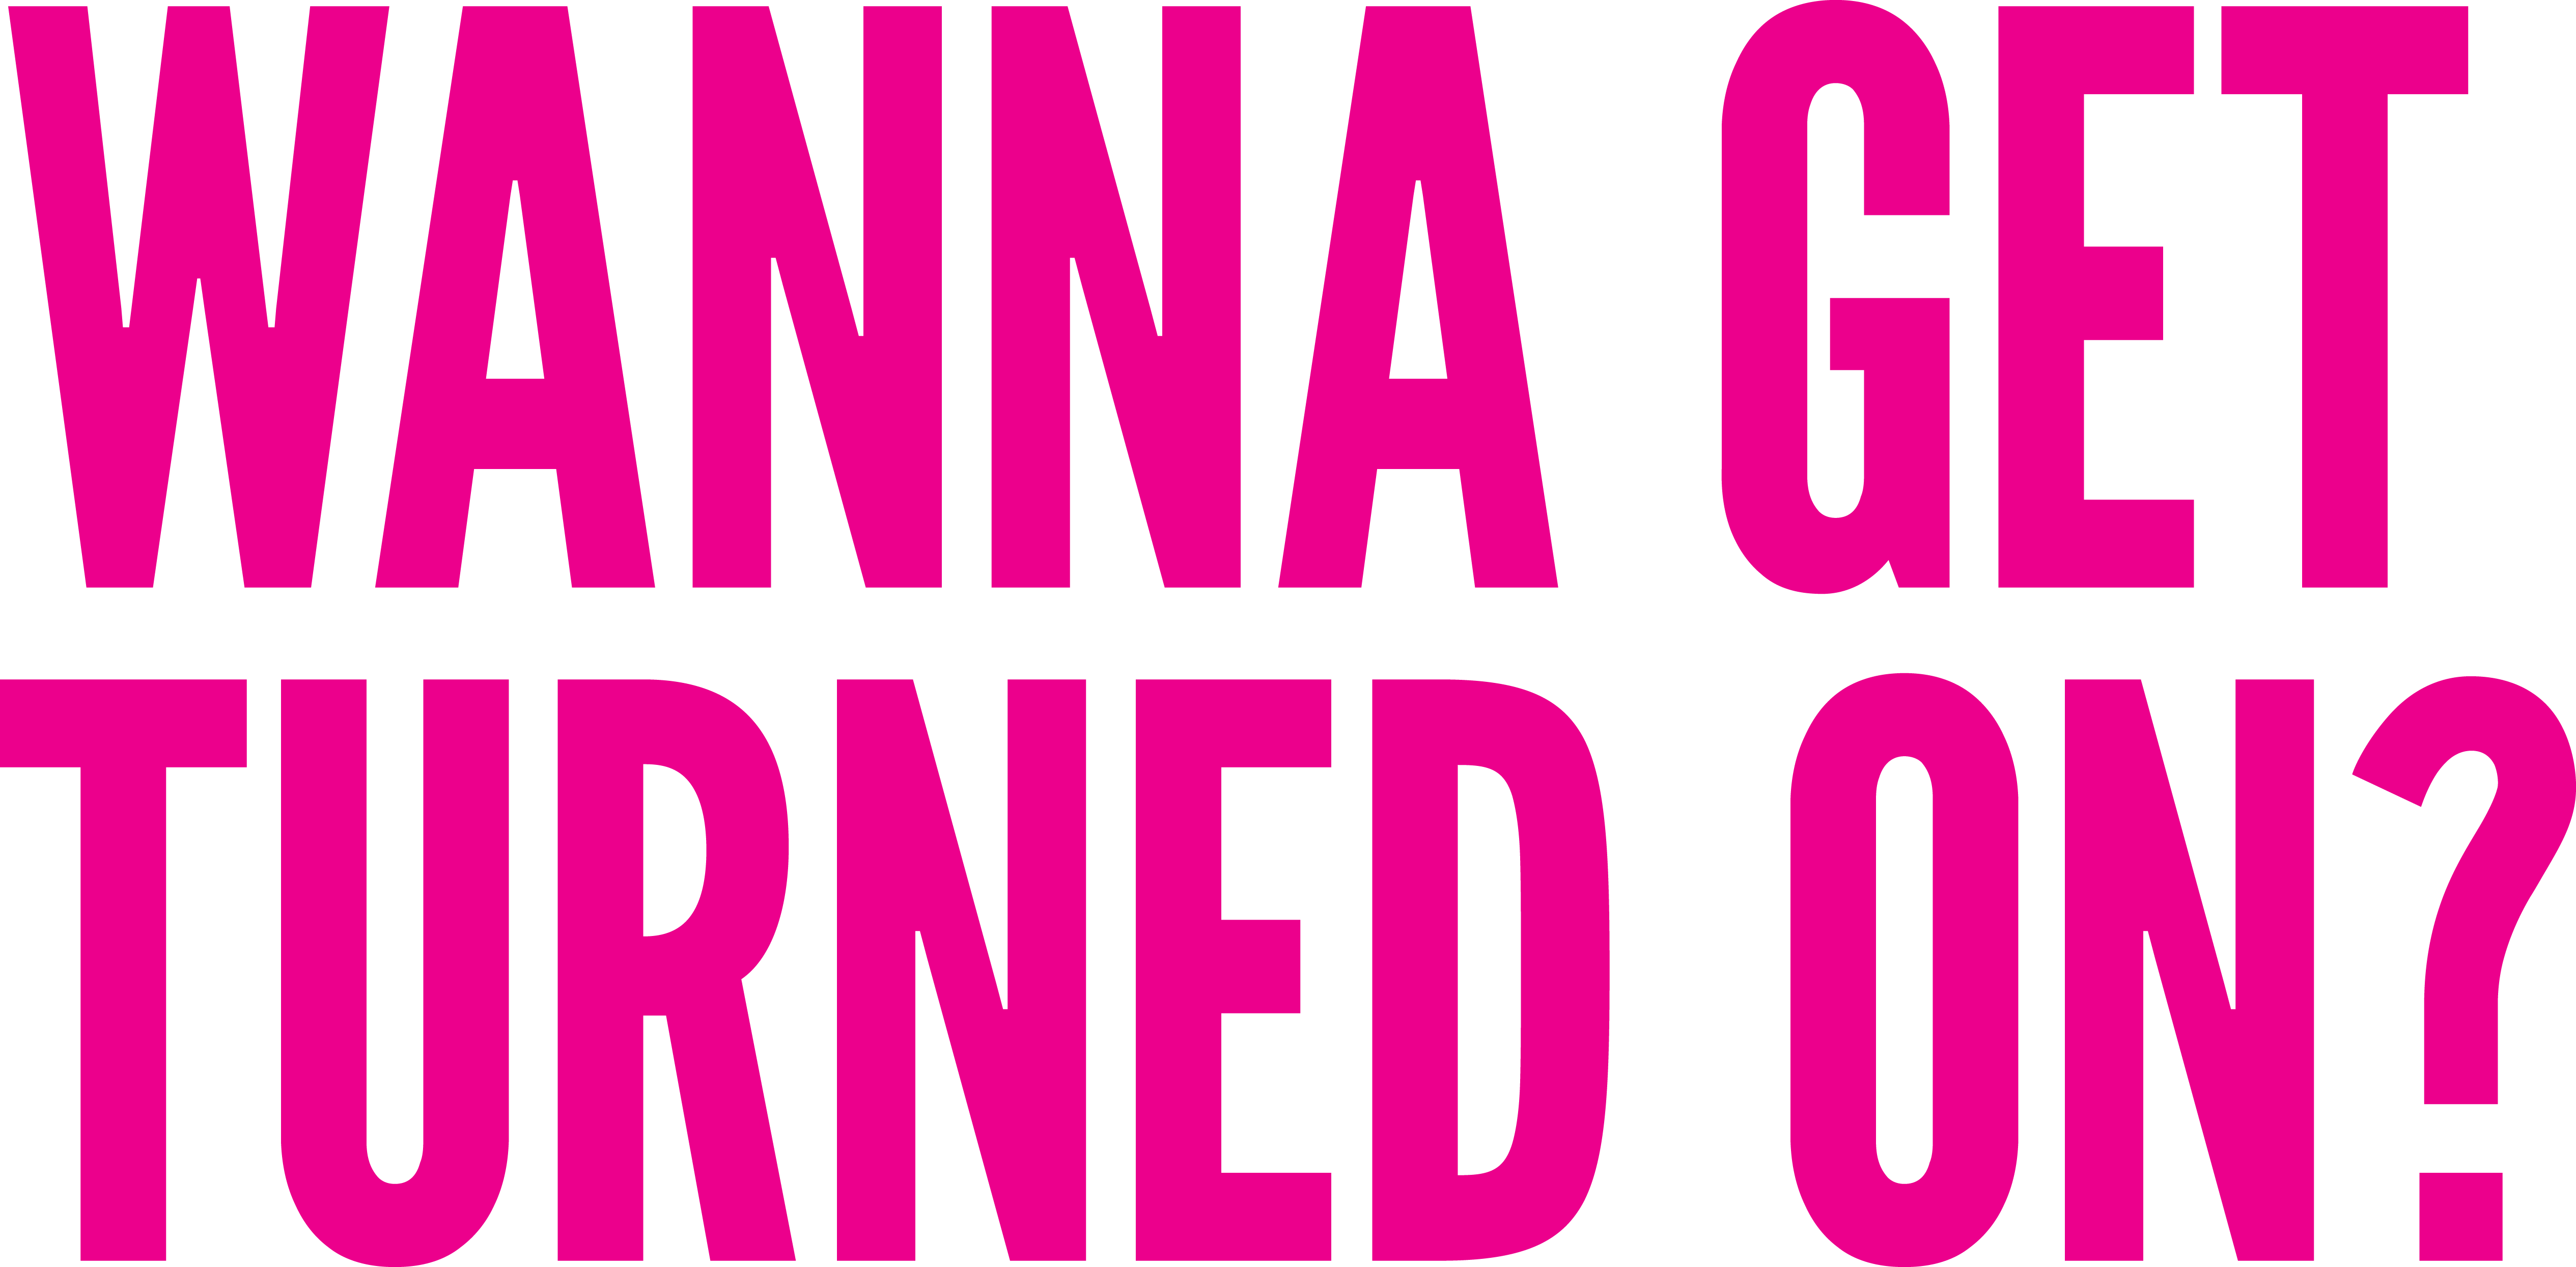 Bold pink text 'Wanna Get Turned On?' emphasizing Wolf River Electric's engaging and attention-grabbing approach to promoting solar energy solutions.